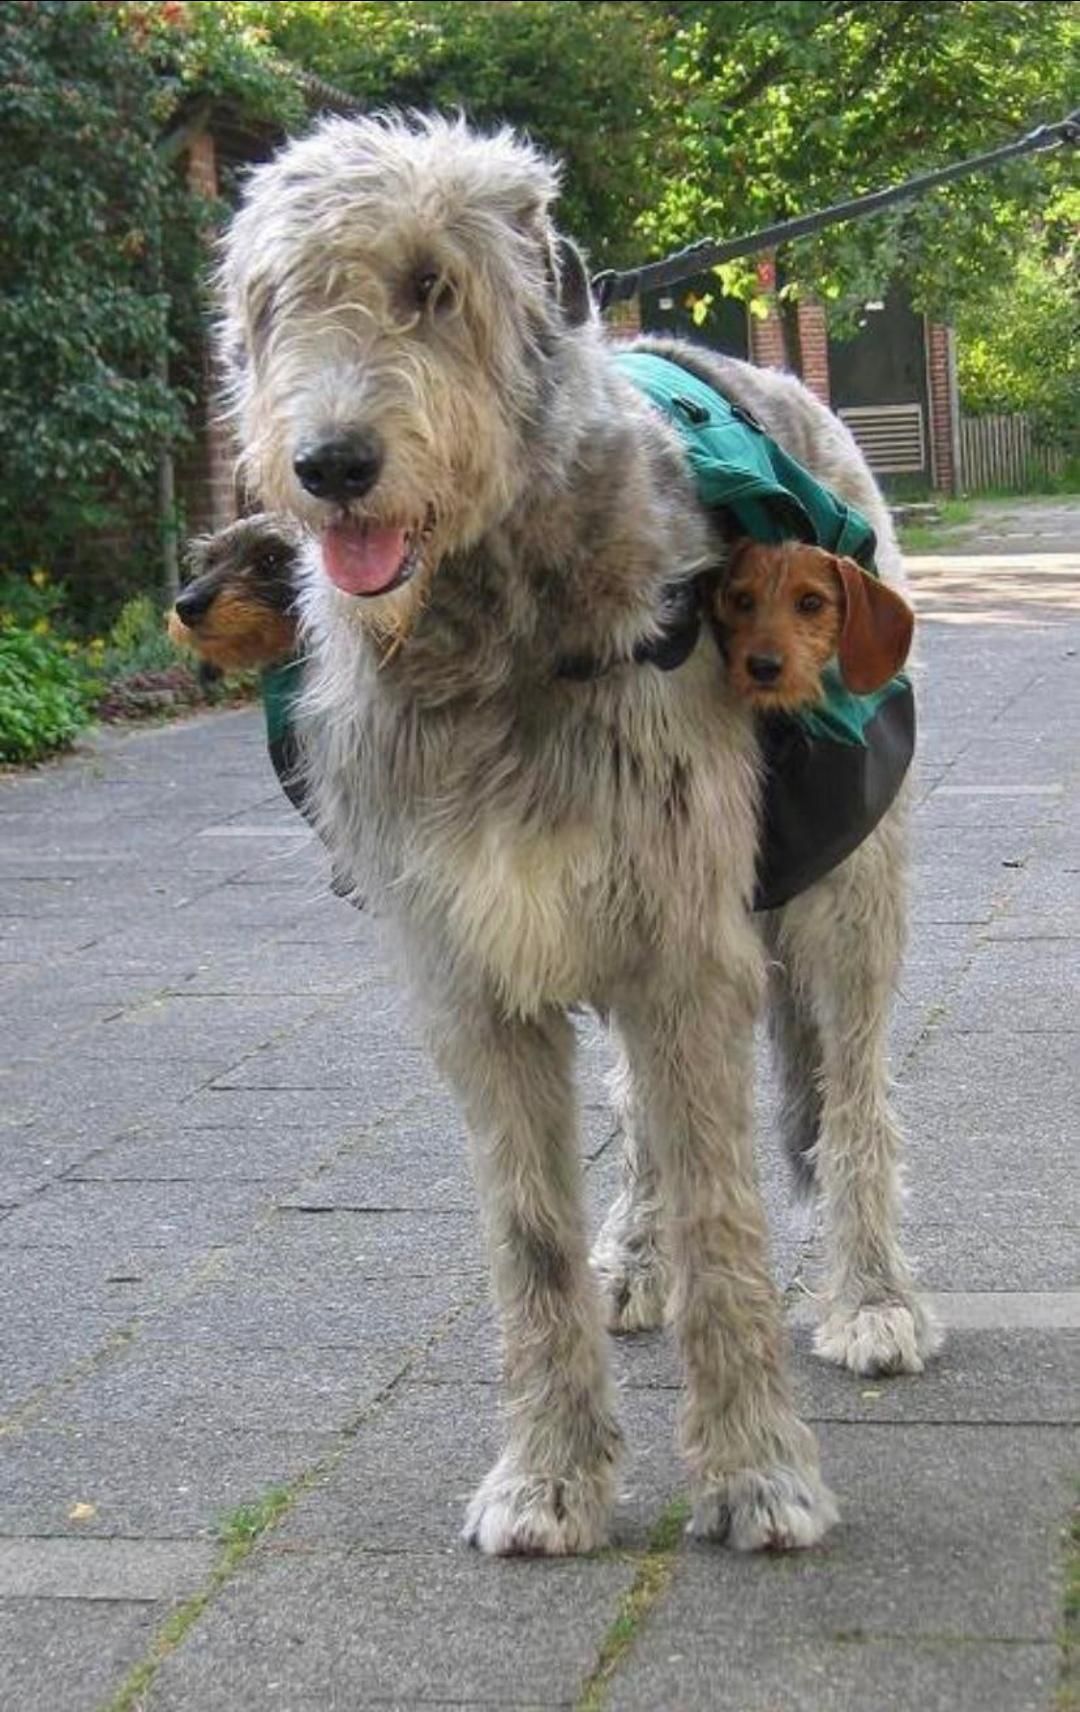 Nice subwoofers